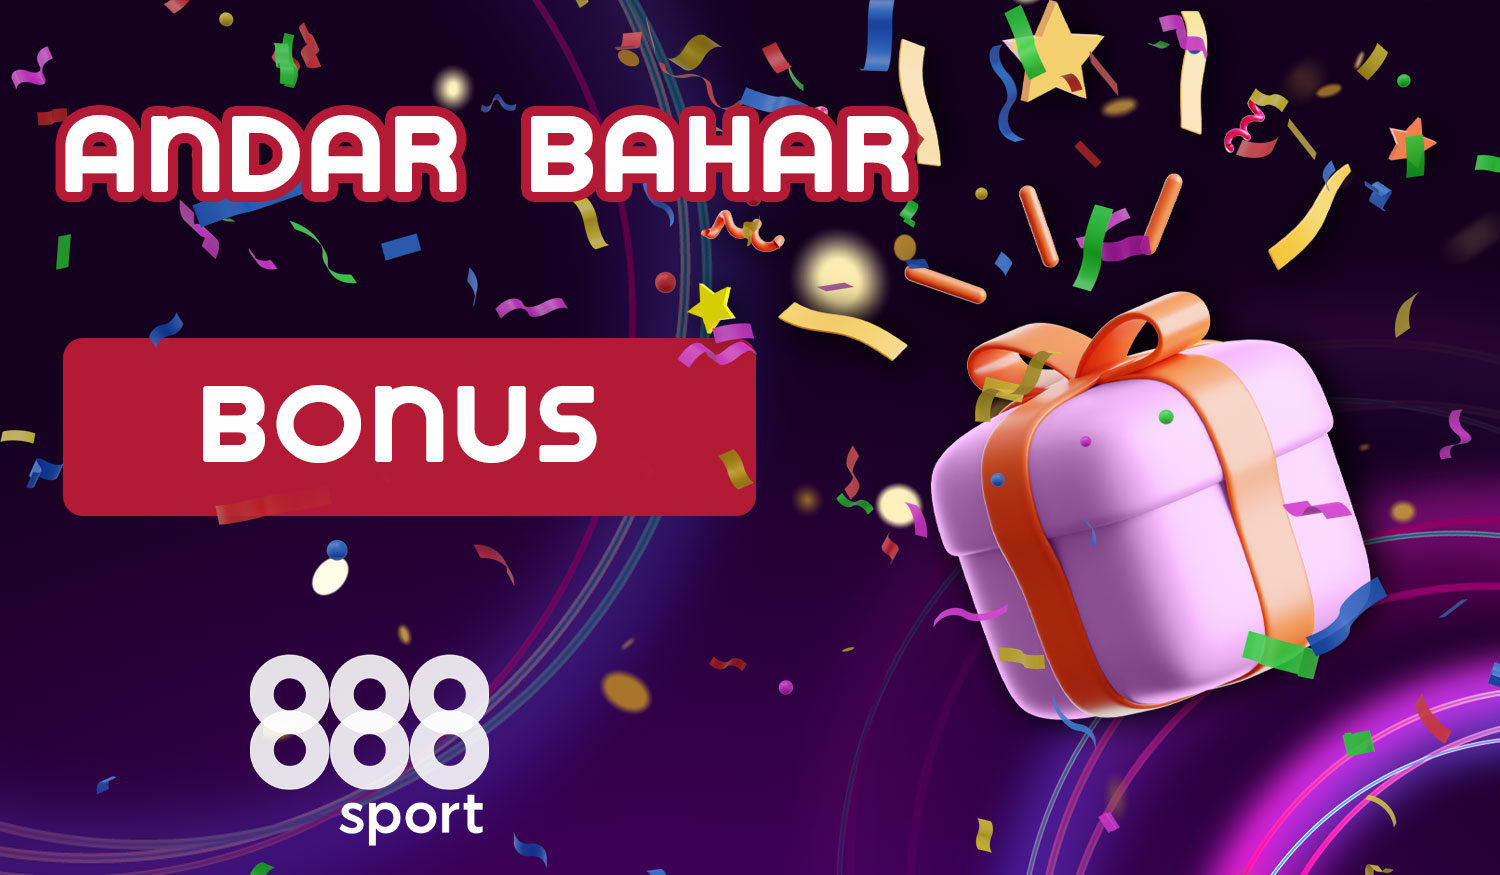 The 888Sport platform offers exciting Andar Bahar bonuses for Indian players